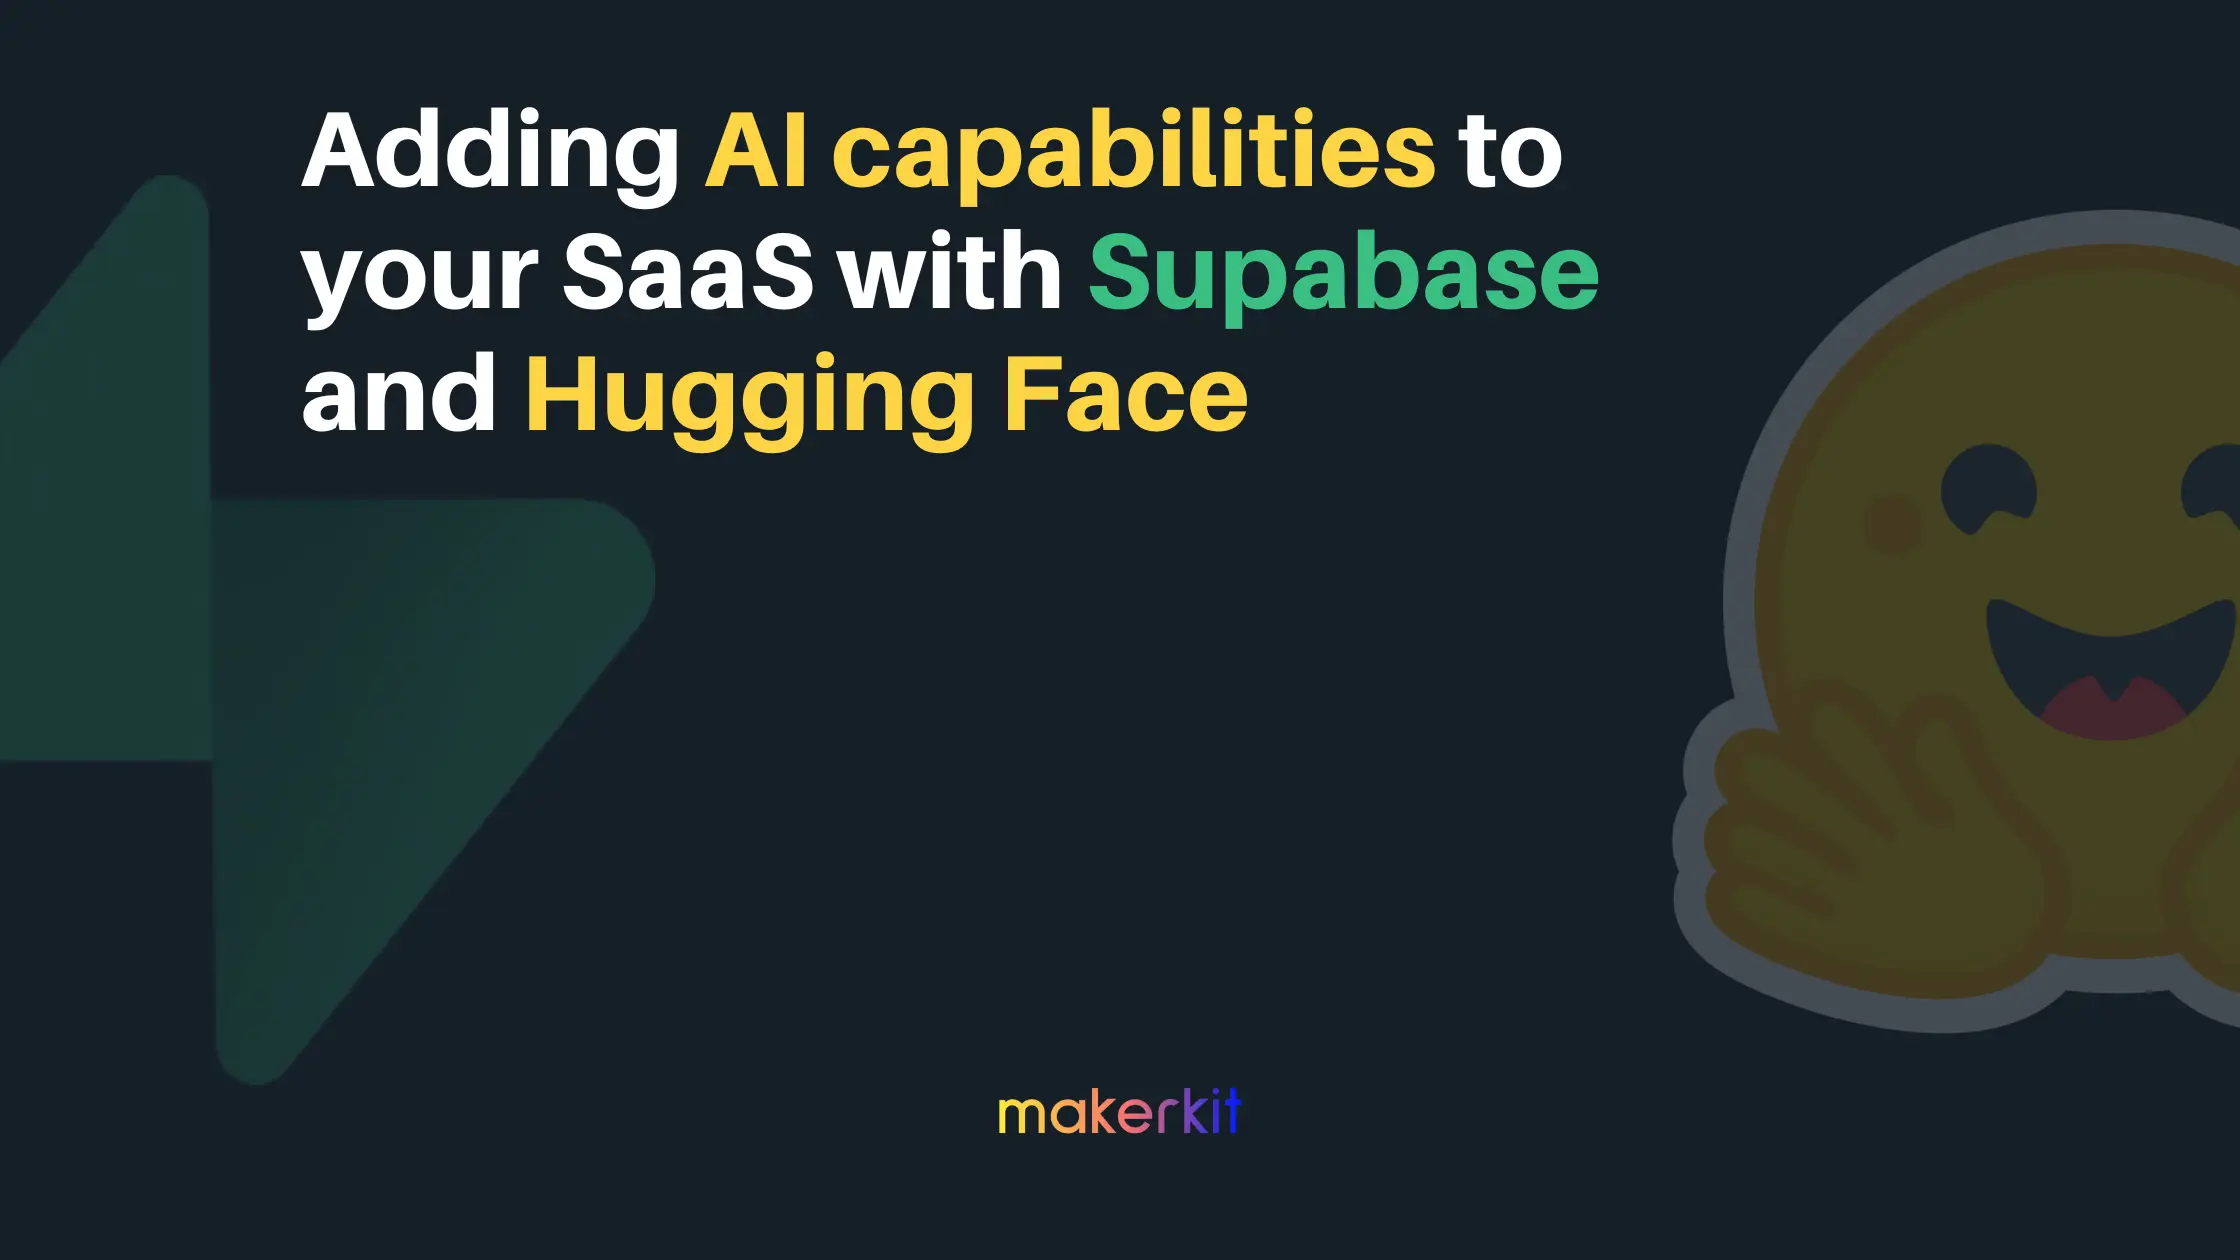 Cover Image for Adding AI capabilities to your Next.js SaaS with Supabase and HuggingFace